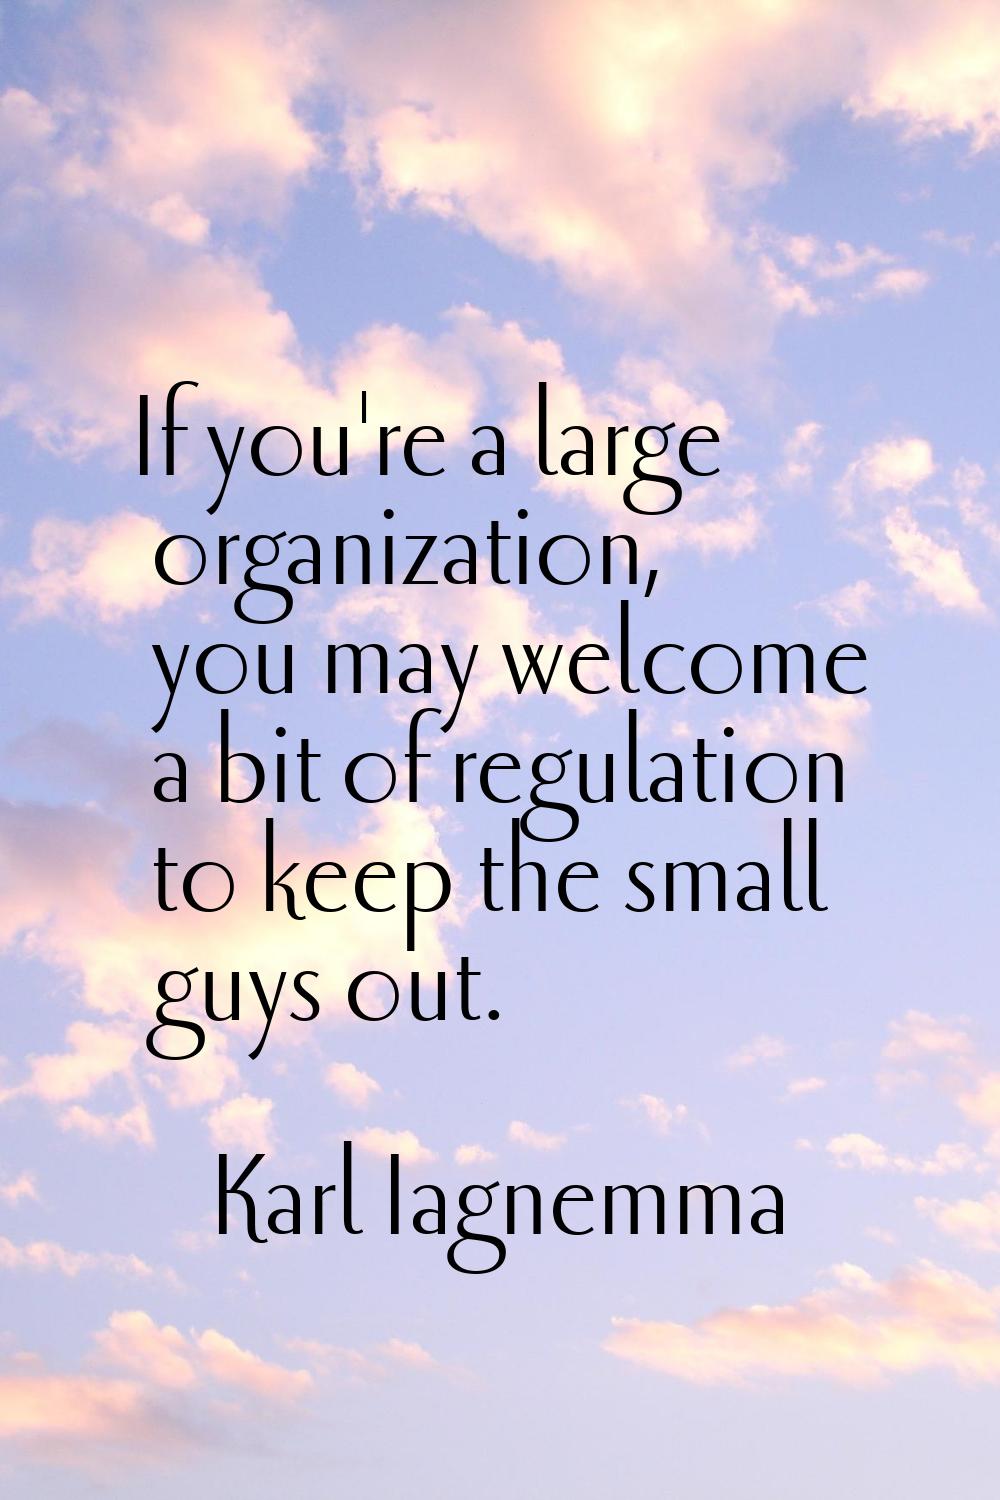 If you're a large organization, you may welcome a bit of regulation to keep the small guys out.